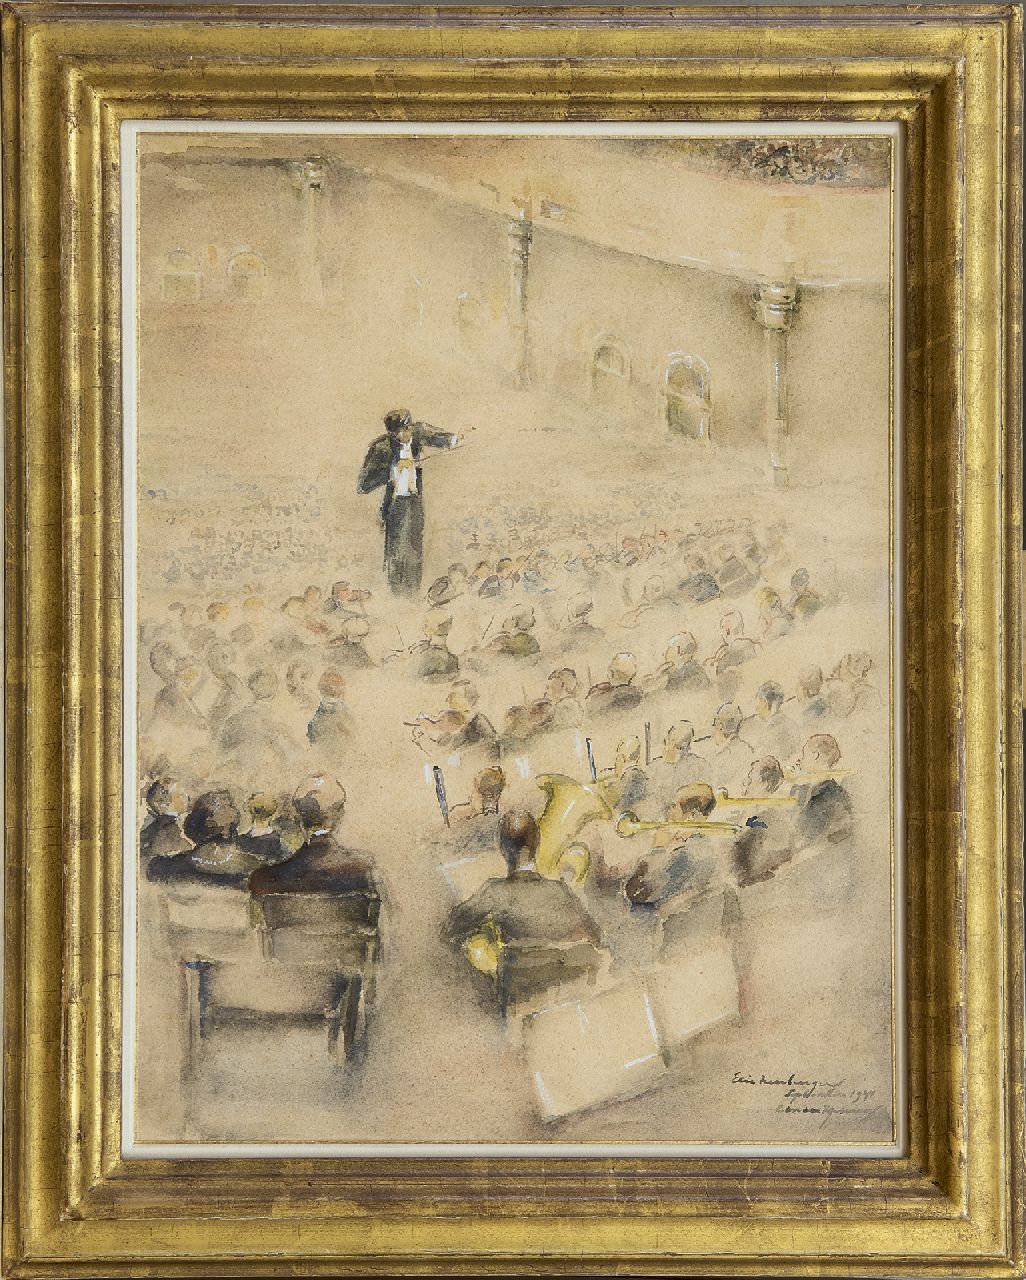 Neuburger E.  | Eliazer 'Elie' Neuburger, In the Concerthall, Amsterdam, watercolour on paper 40.0 x 30.0 cm, signed l.r. and dated September 1941